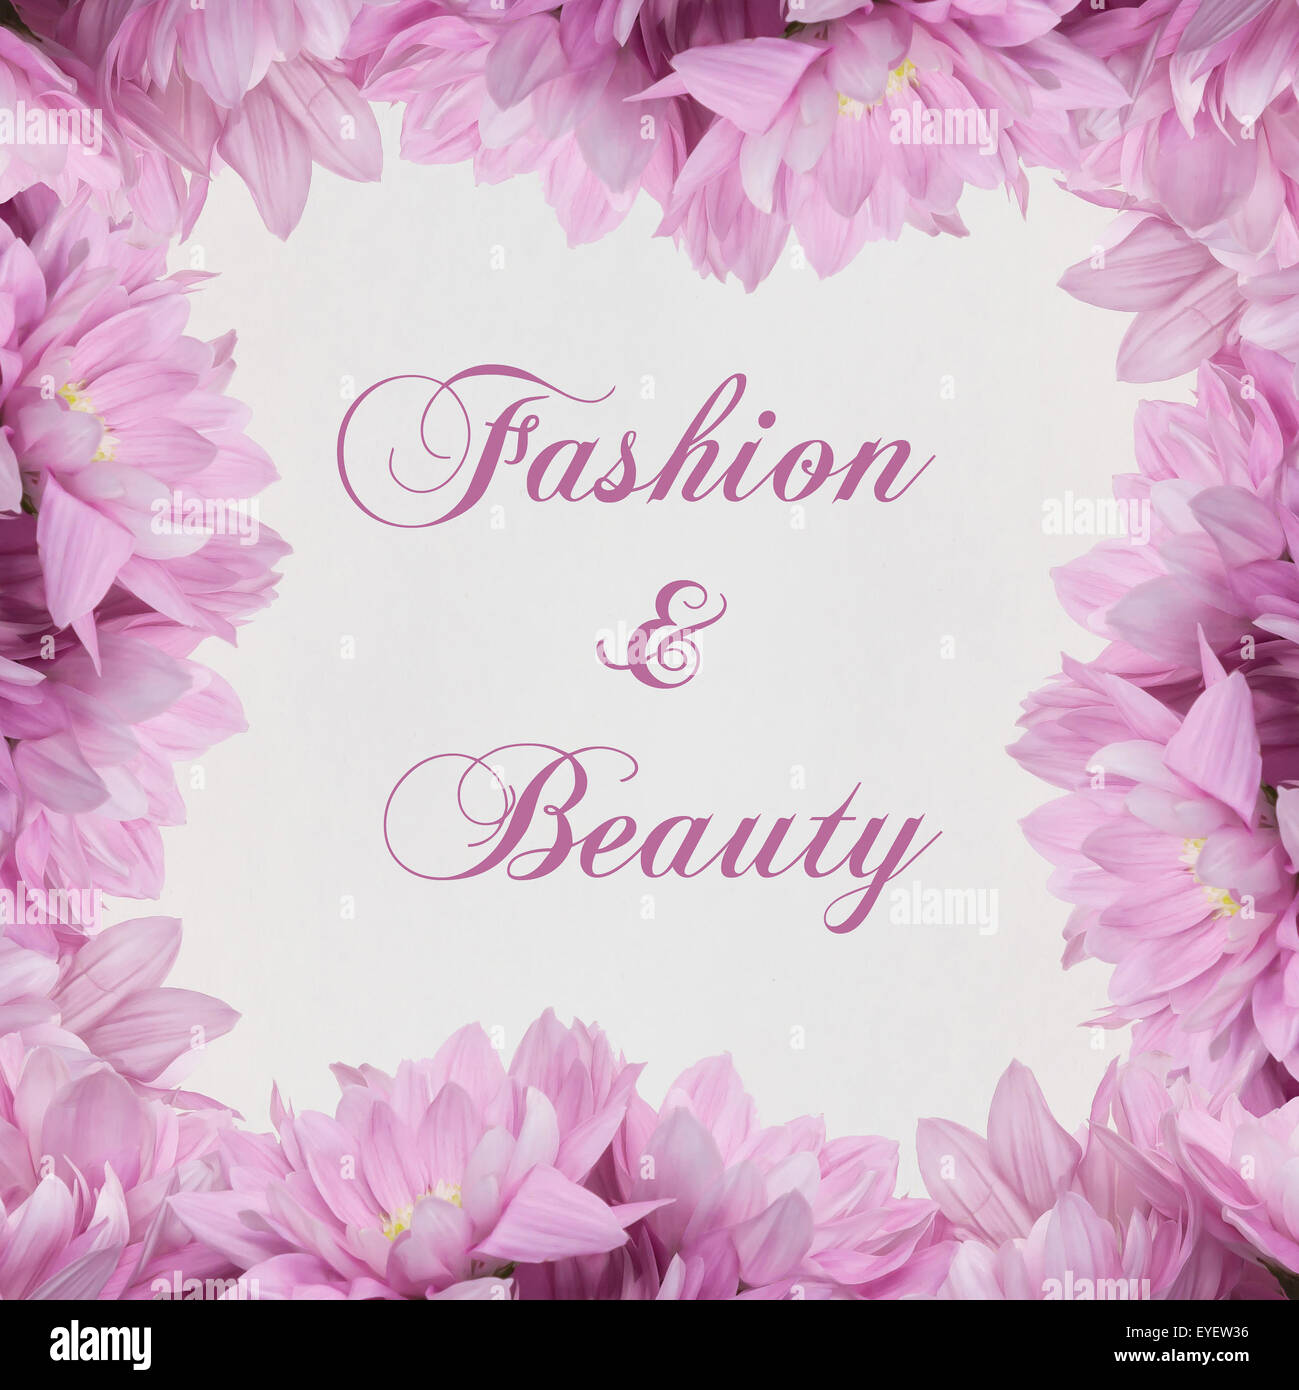 Fashion and beauty flower decoration, text Stock Photo